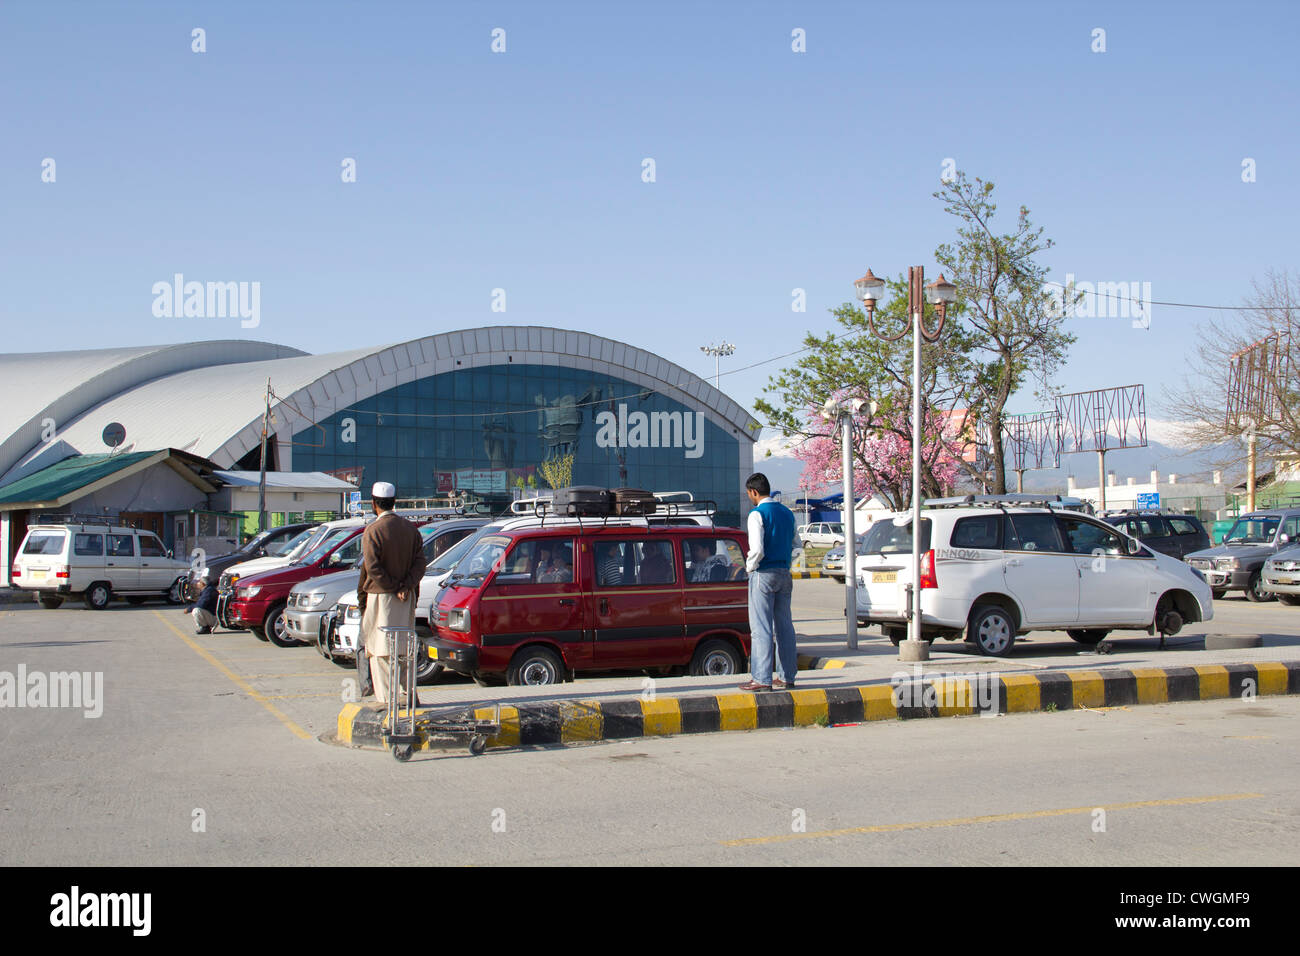 View of Srinagar airport and taxis outside. This is a high security area due to the history of terrorism in Kashmir. Stock Photo